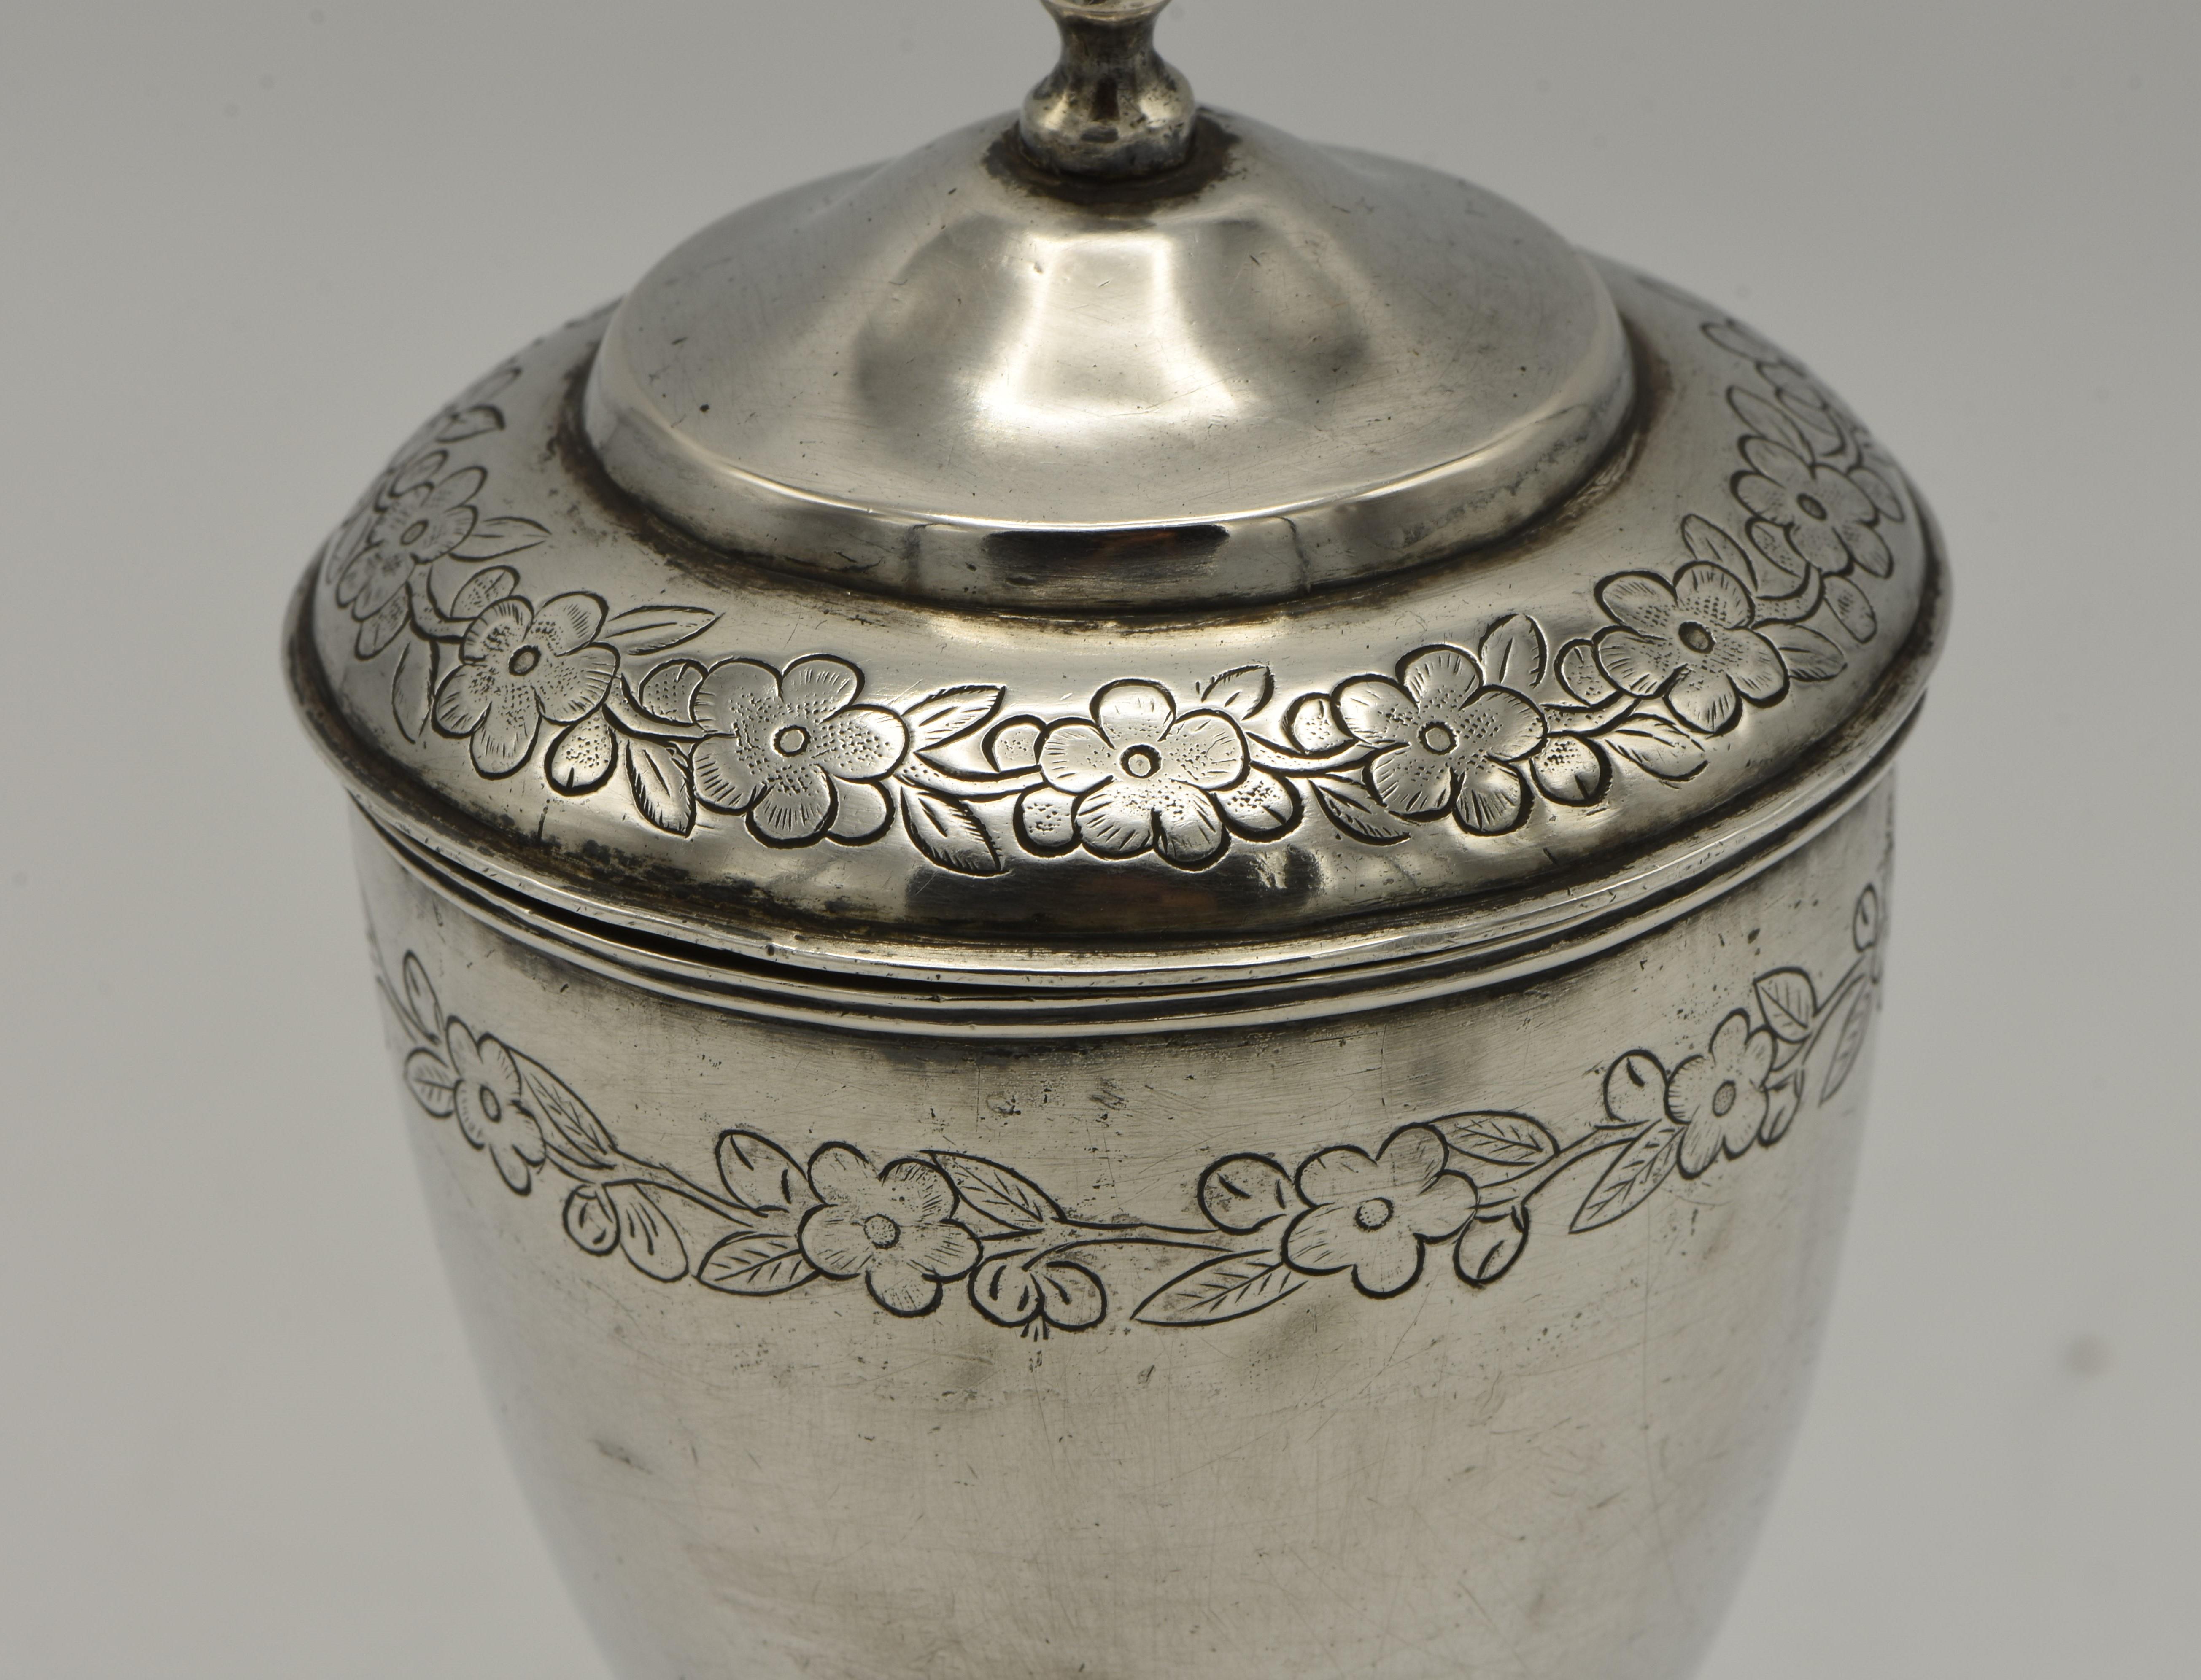 19th Century Chinese Silver Kiddush Goblet with a Saucer For Sale 2